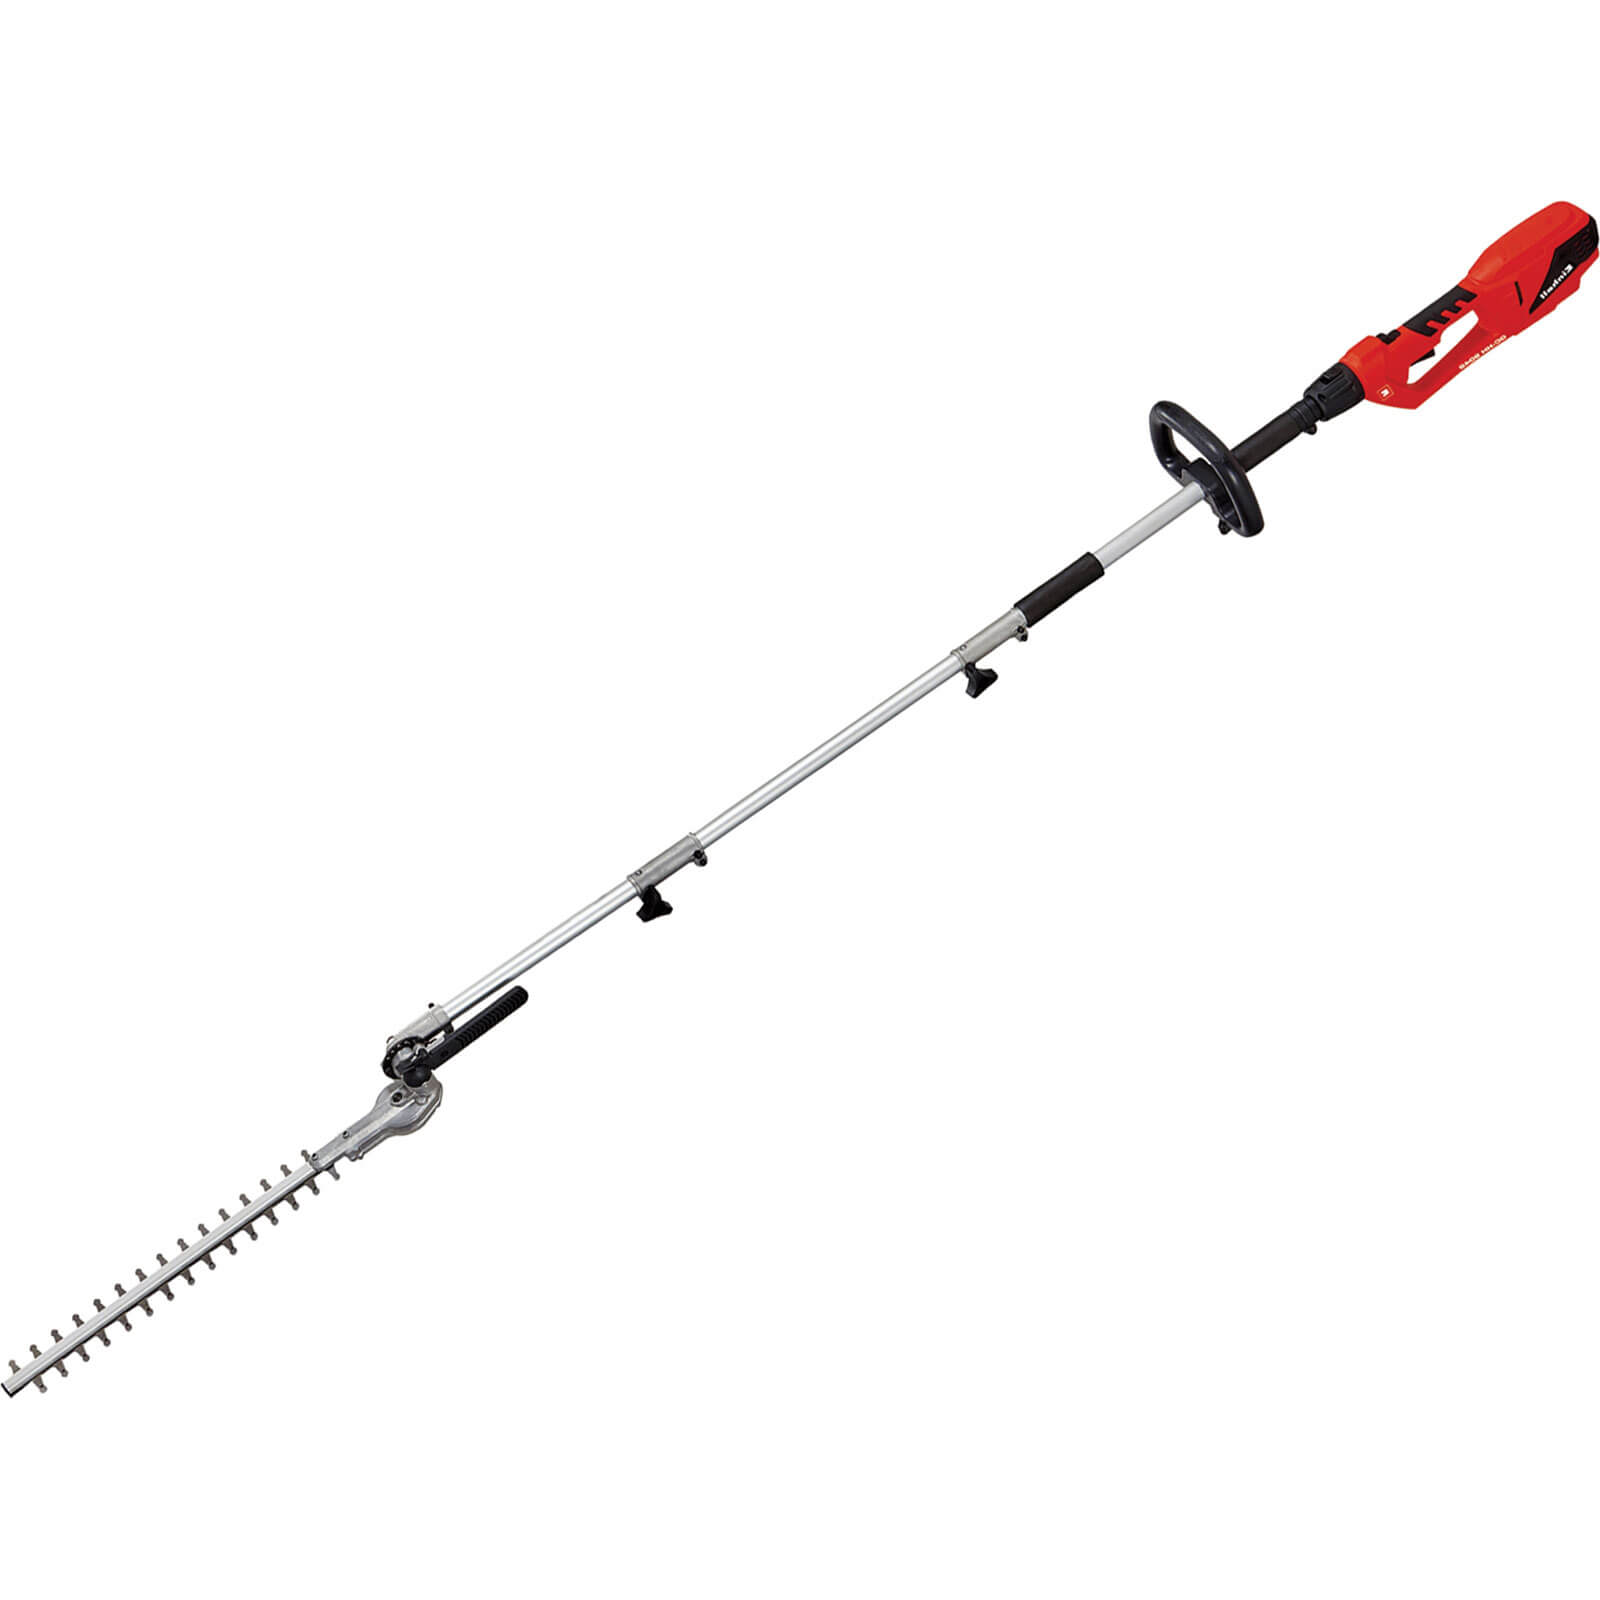 Einhell GC-HH 9048 Telescopic Pole Hedge Trimmer 410mm 240v